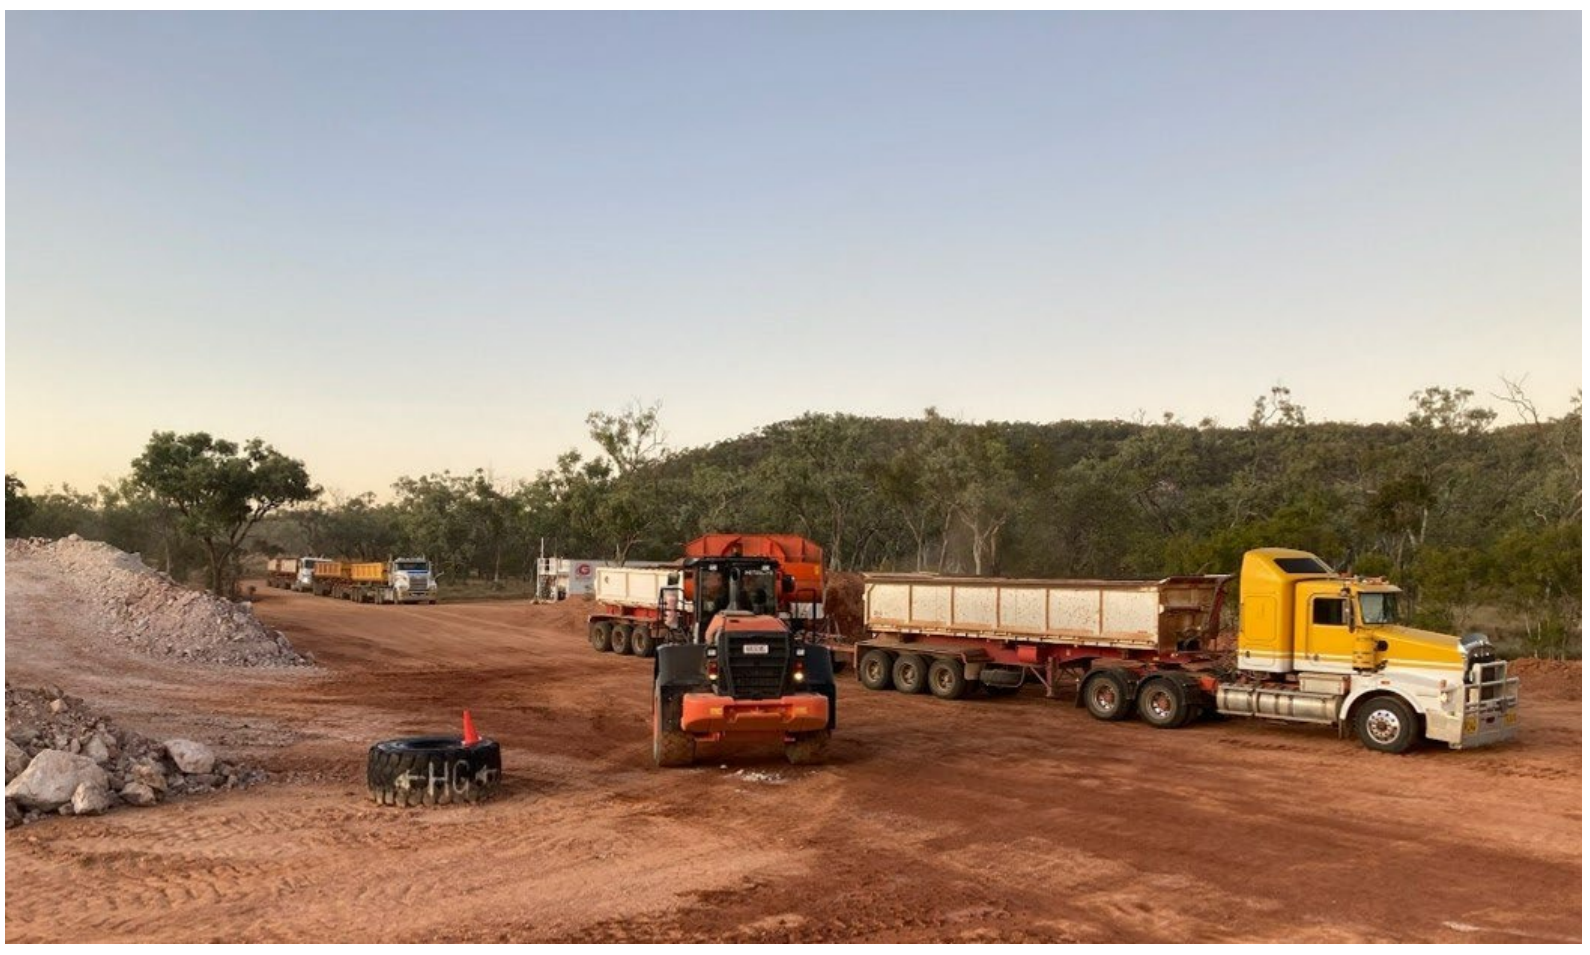 A look at haulage activities underway at Agate Creek